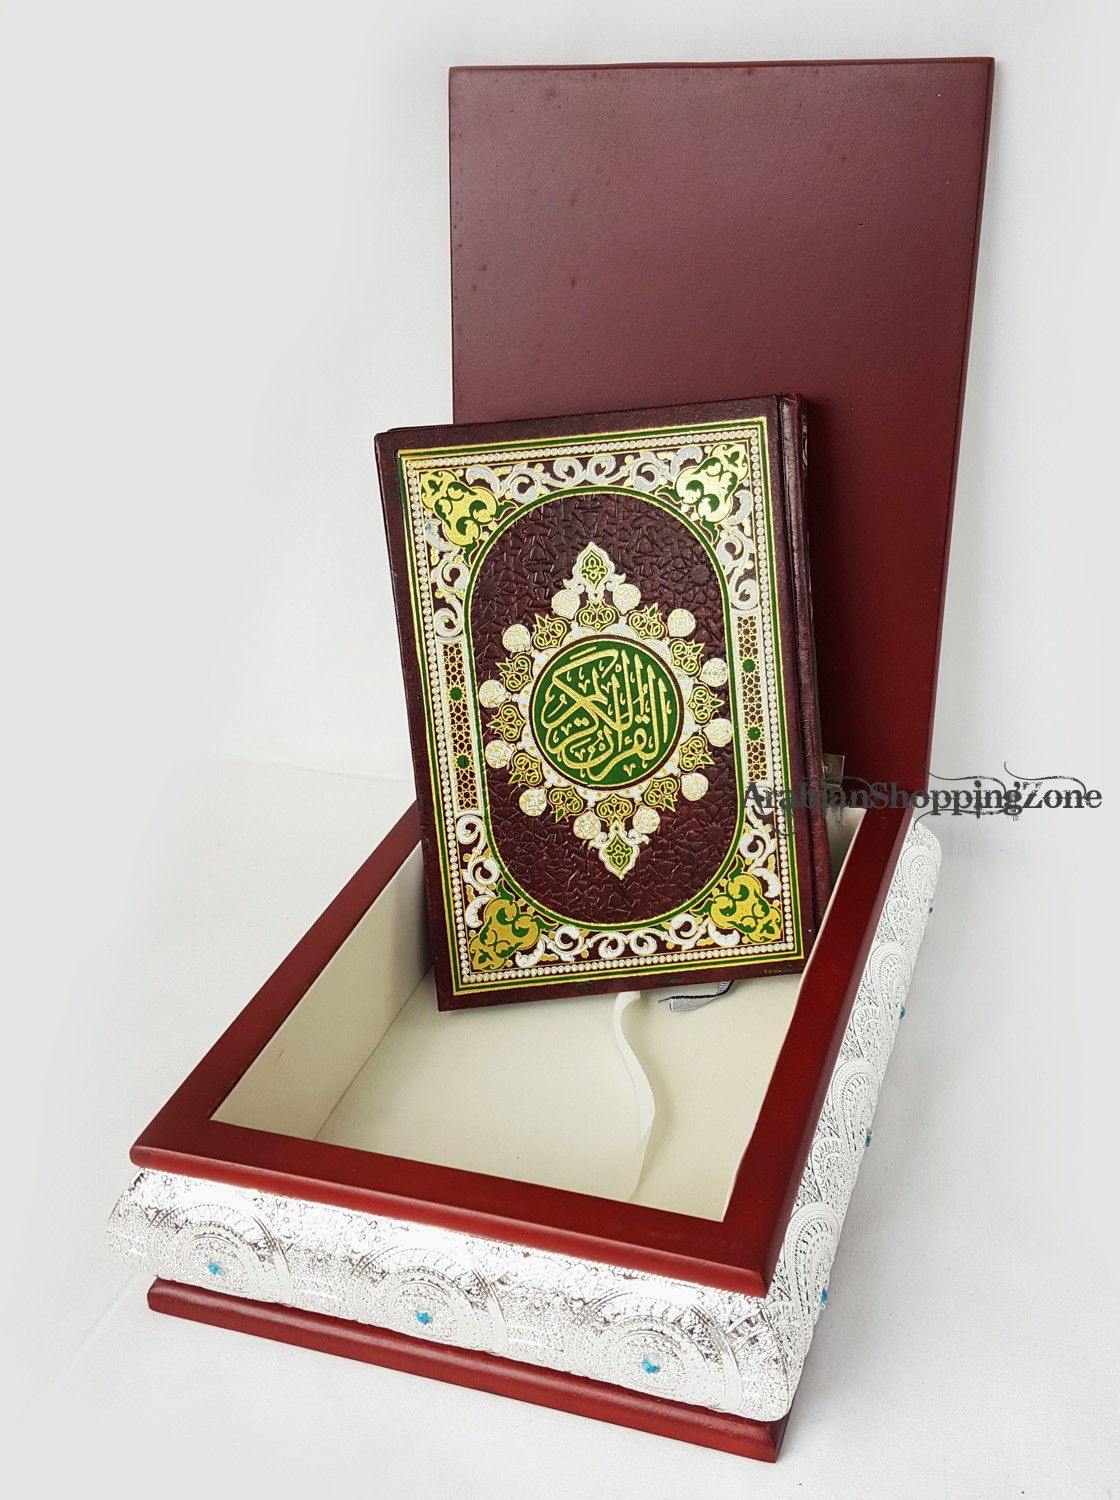 10" Quran Silver Covered Decorated Wooden Storage Box #2314S - Arabian Shopping Zone